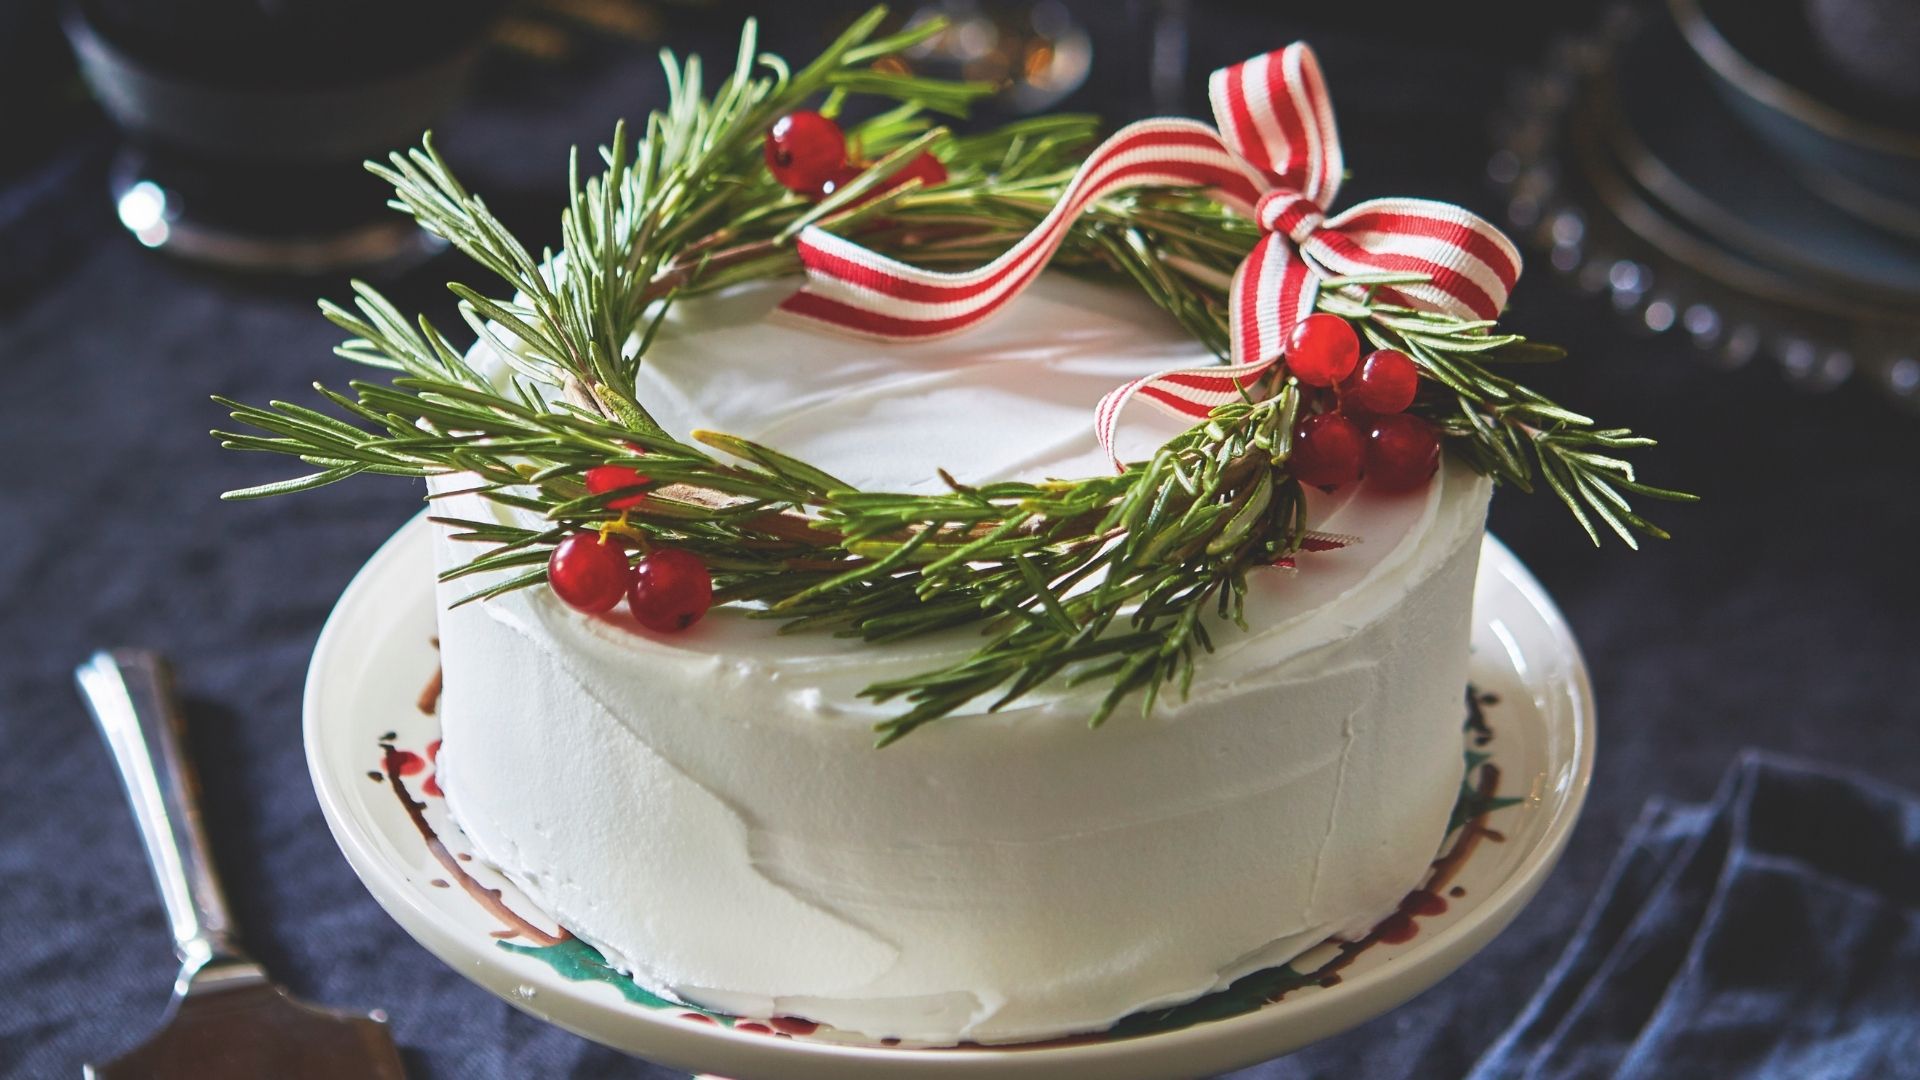 Irresistible Christmas Cake on a Christmas cake stand, rosemary decoration tied with ribbon